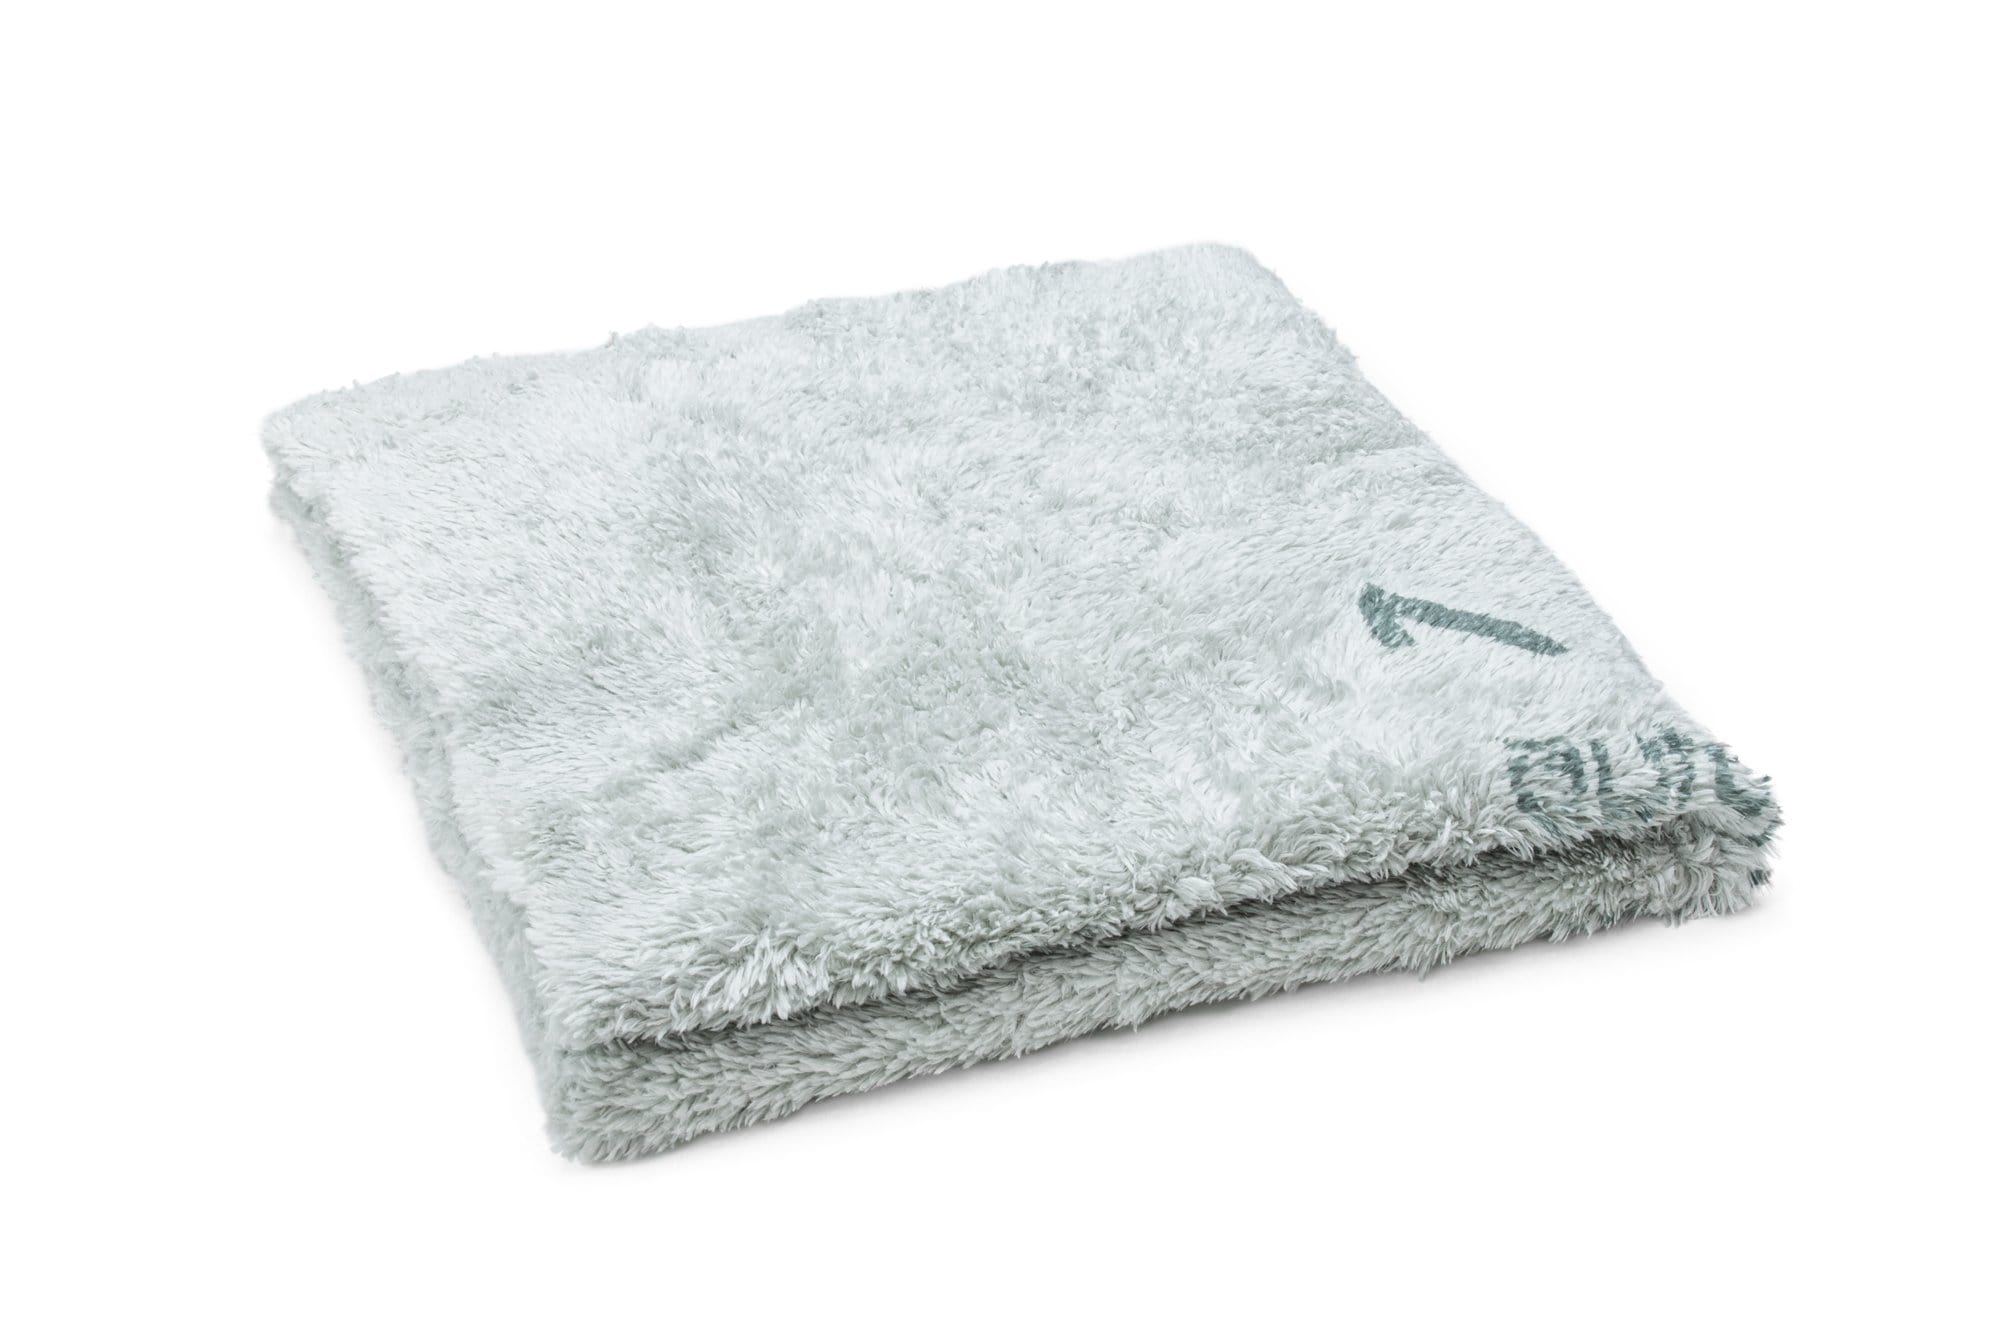 Antimicrobial Towel (Check Cappuccino), All-Clad